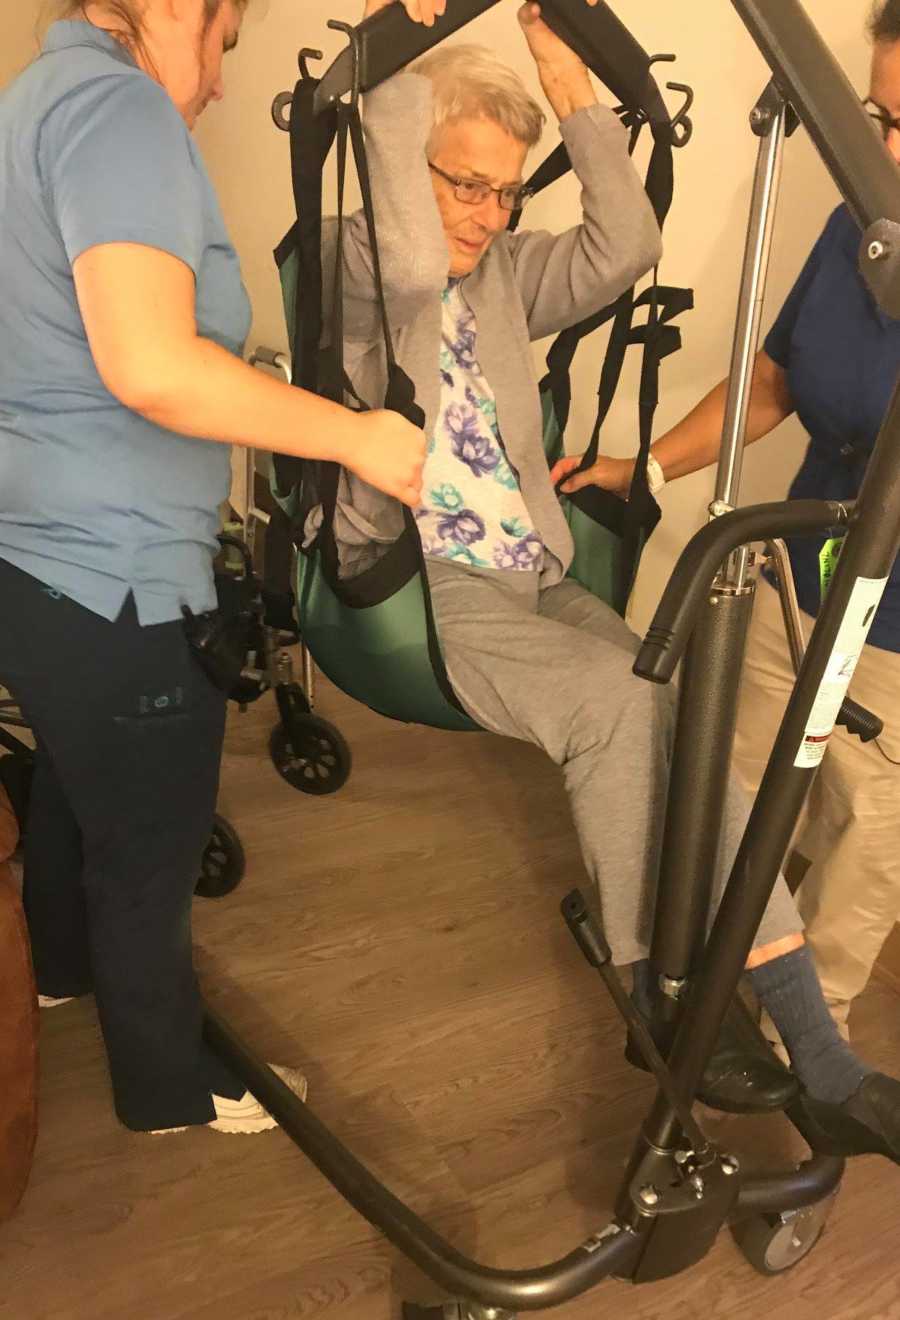 Elderly woman with dementia sits in physical therapy machine with helpers